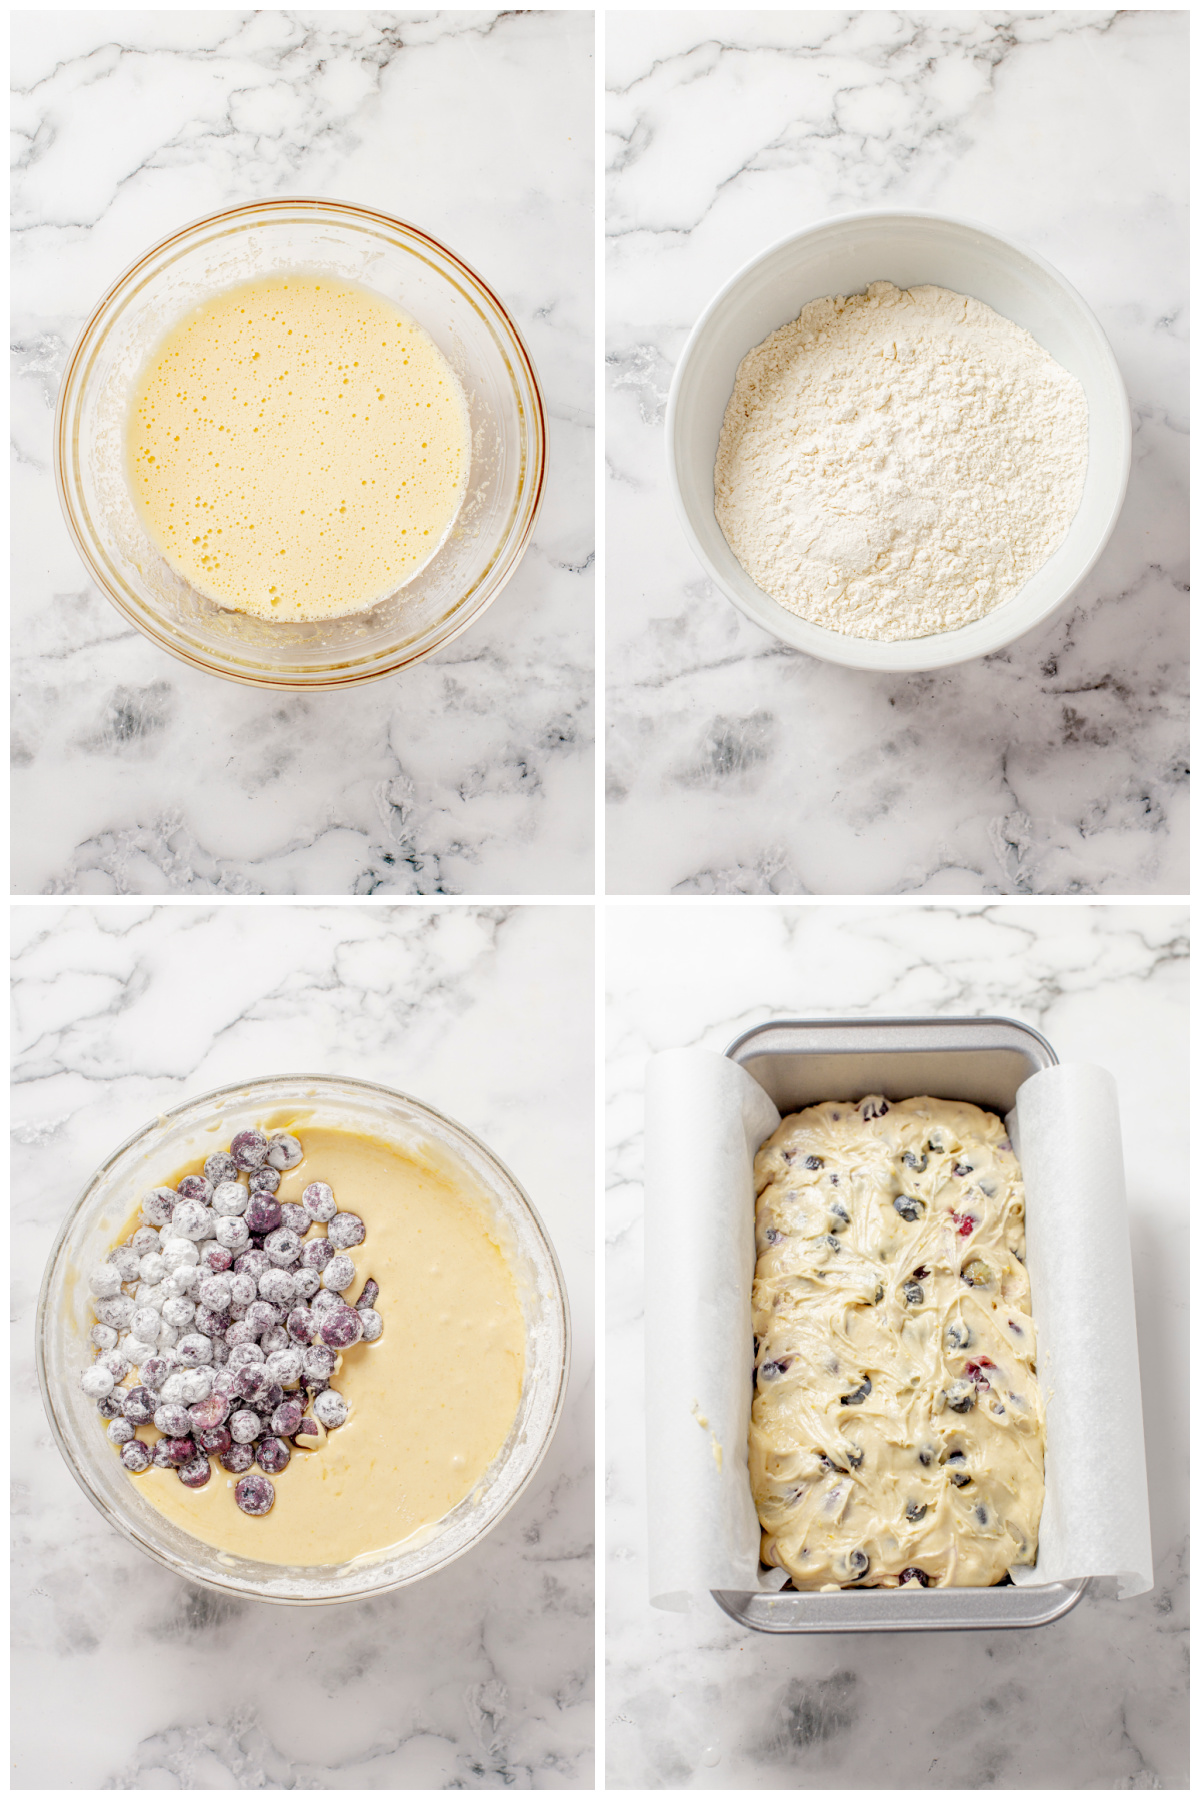 How to make blueberry lemon quick bread